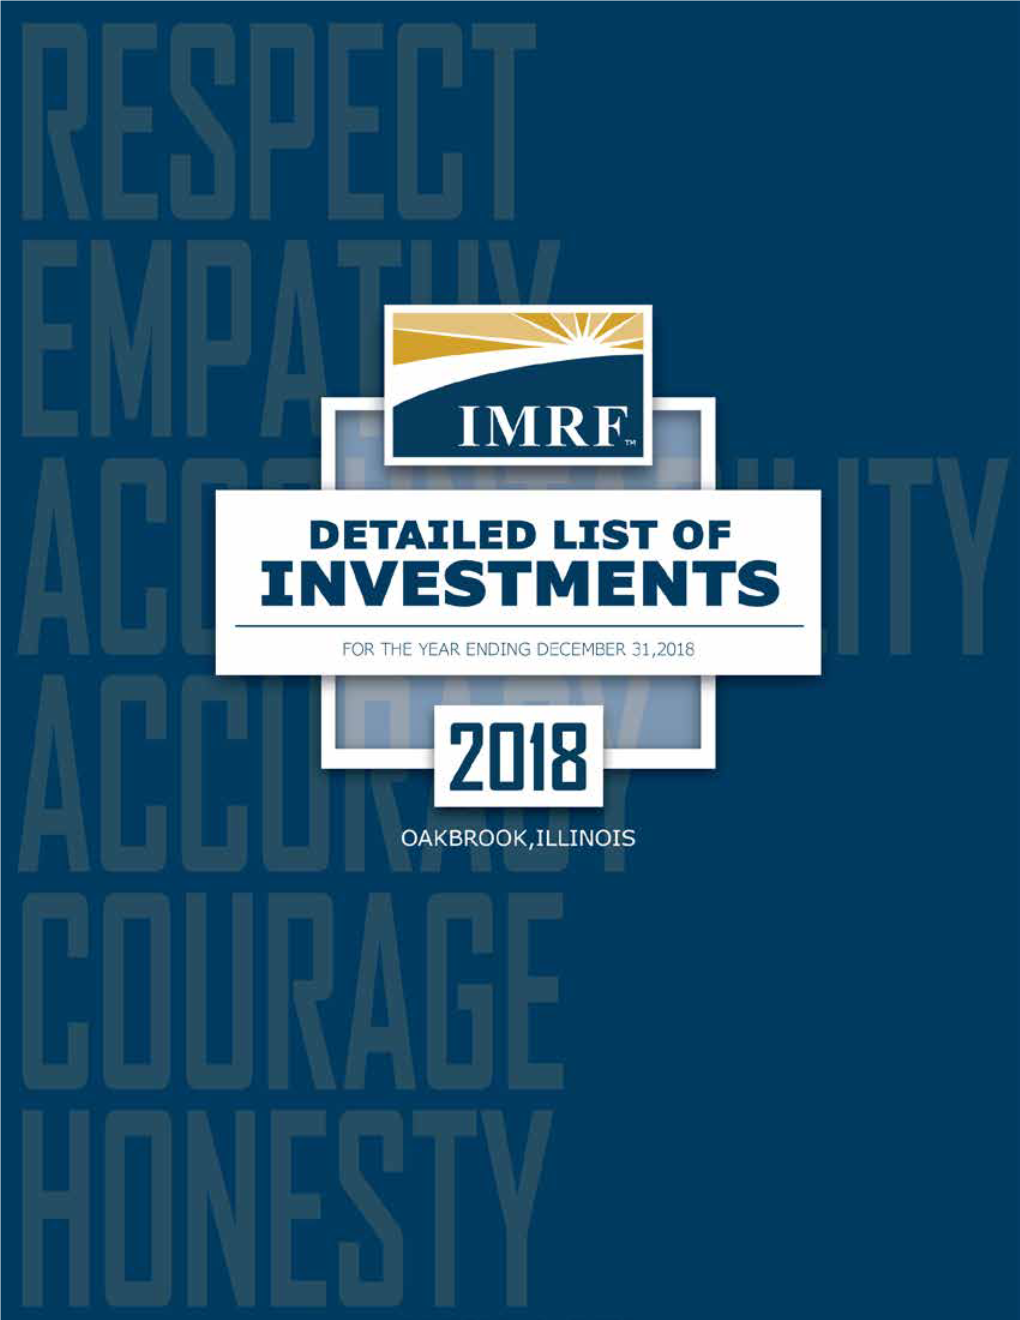 Detailed List of 2018 Investments